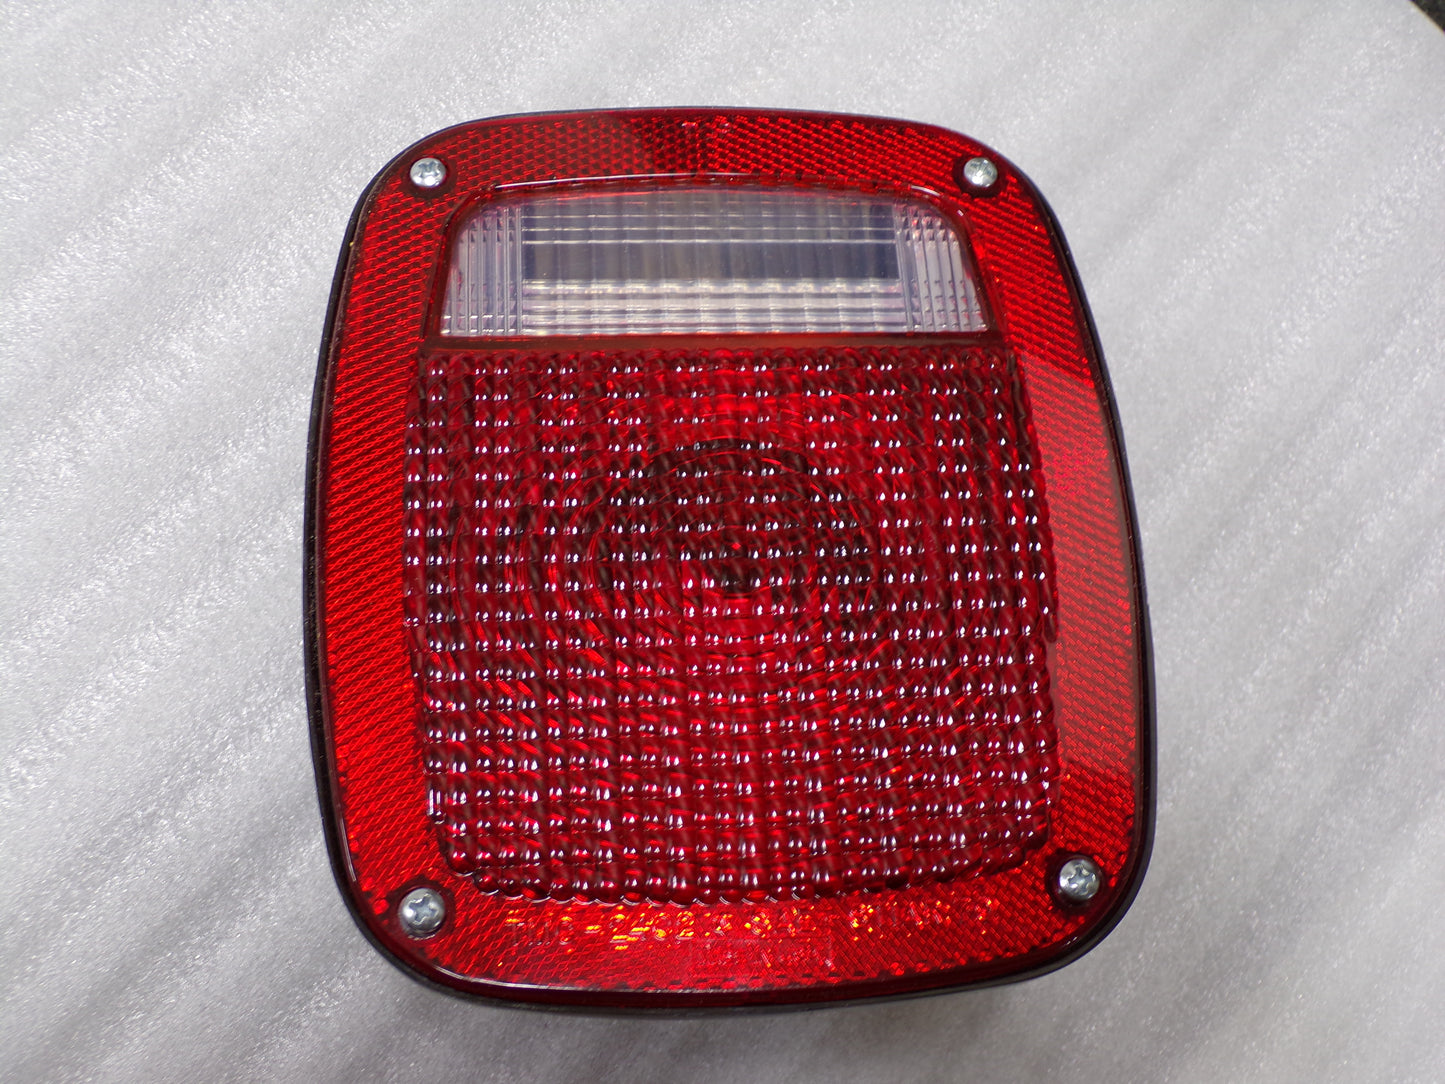 TRUCK-LITE 5316Y101 - Signal-Stat, Incandescent, Red/Clear Polycarbonate Lens, RH, Combo Box Light, 3 Stud , License Light, Packard , 12V (CR00579-WTA14)